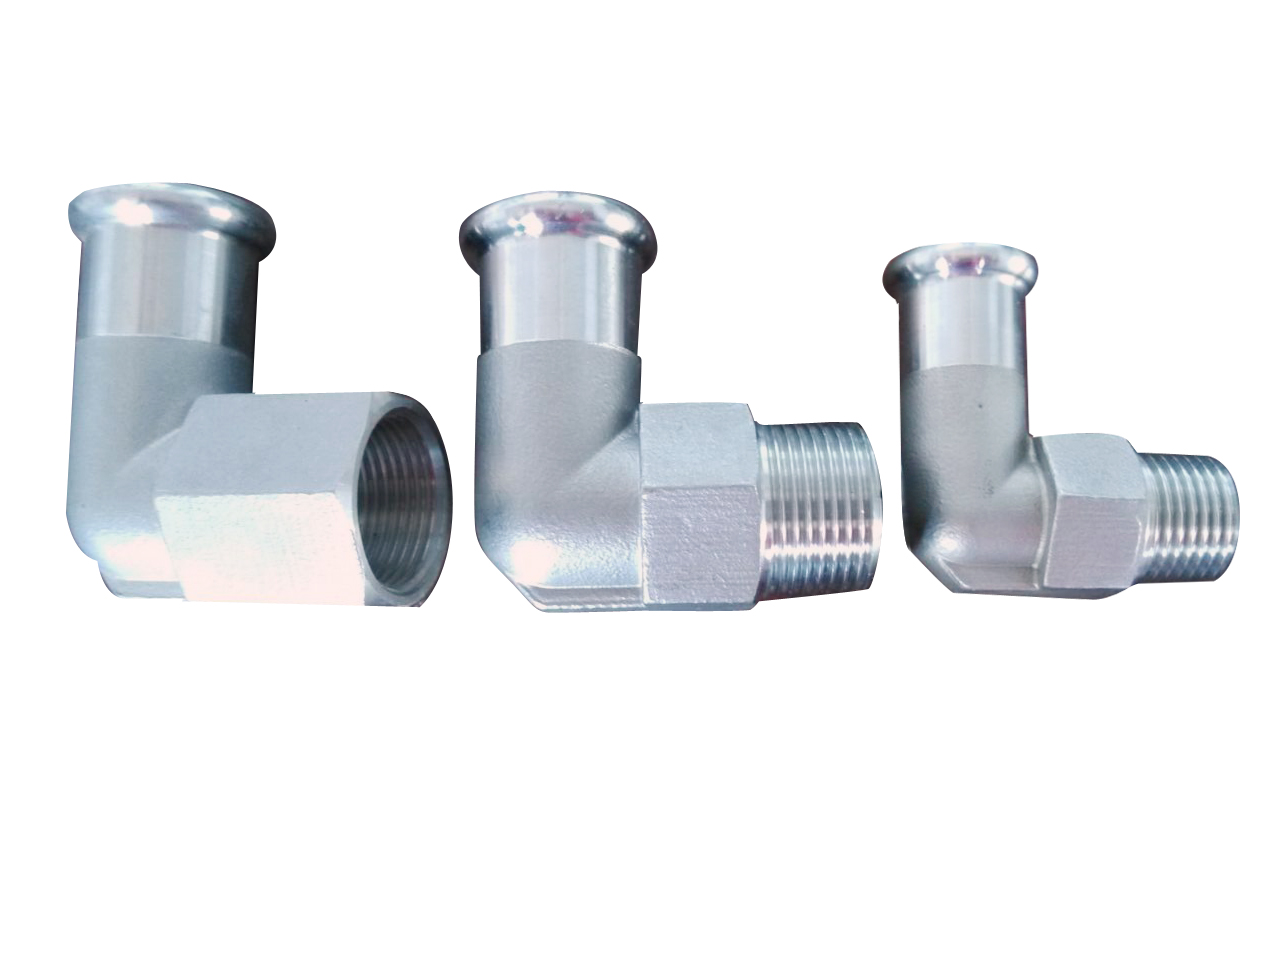 Stainless steel press-fittings